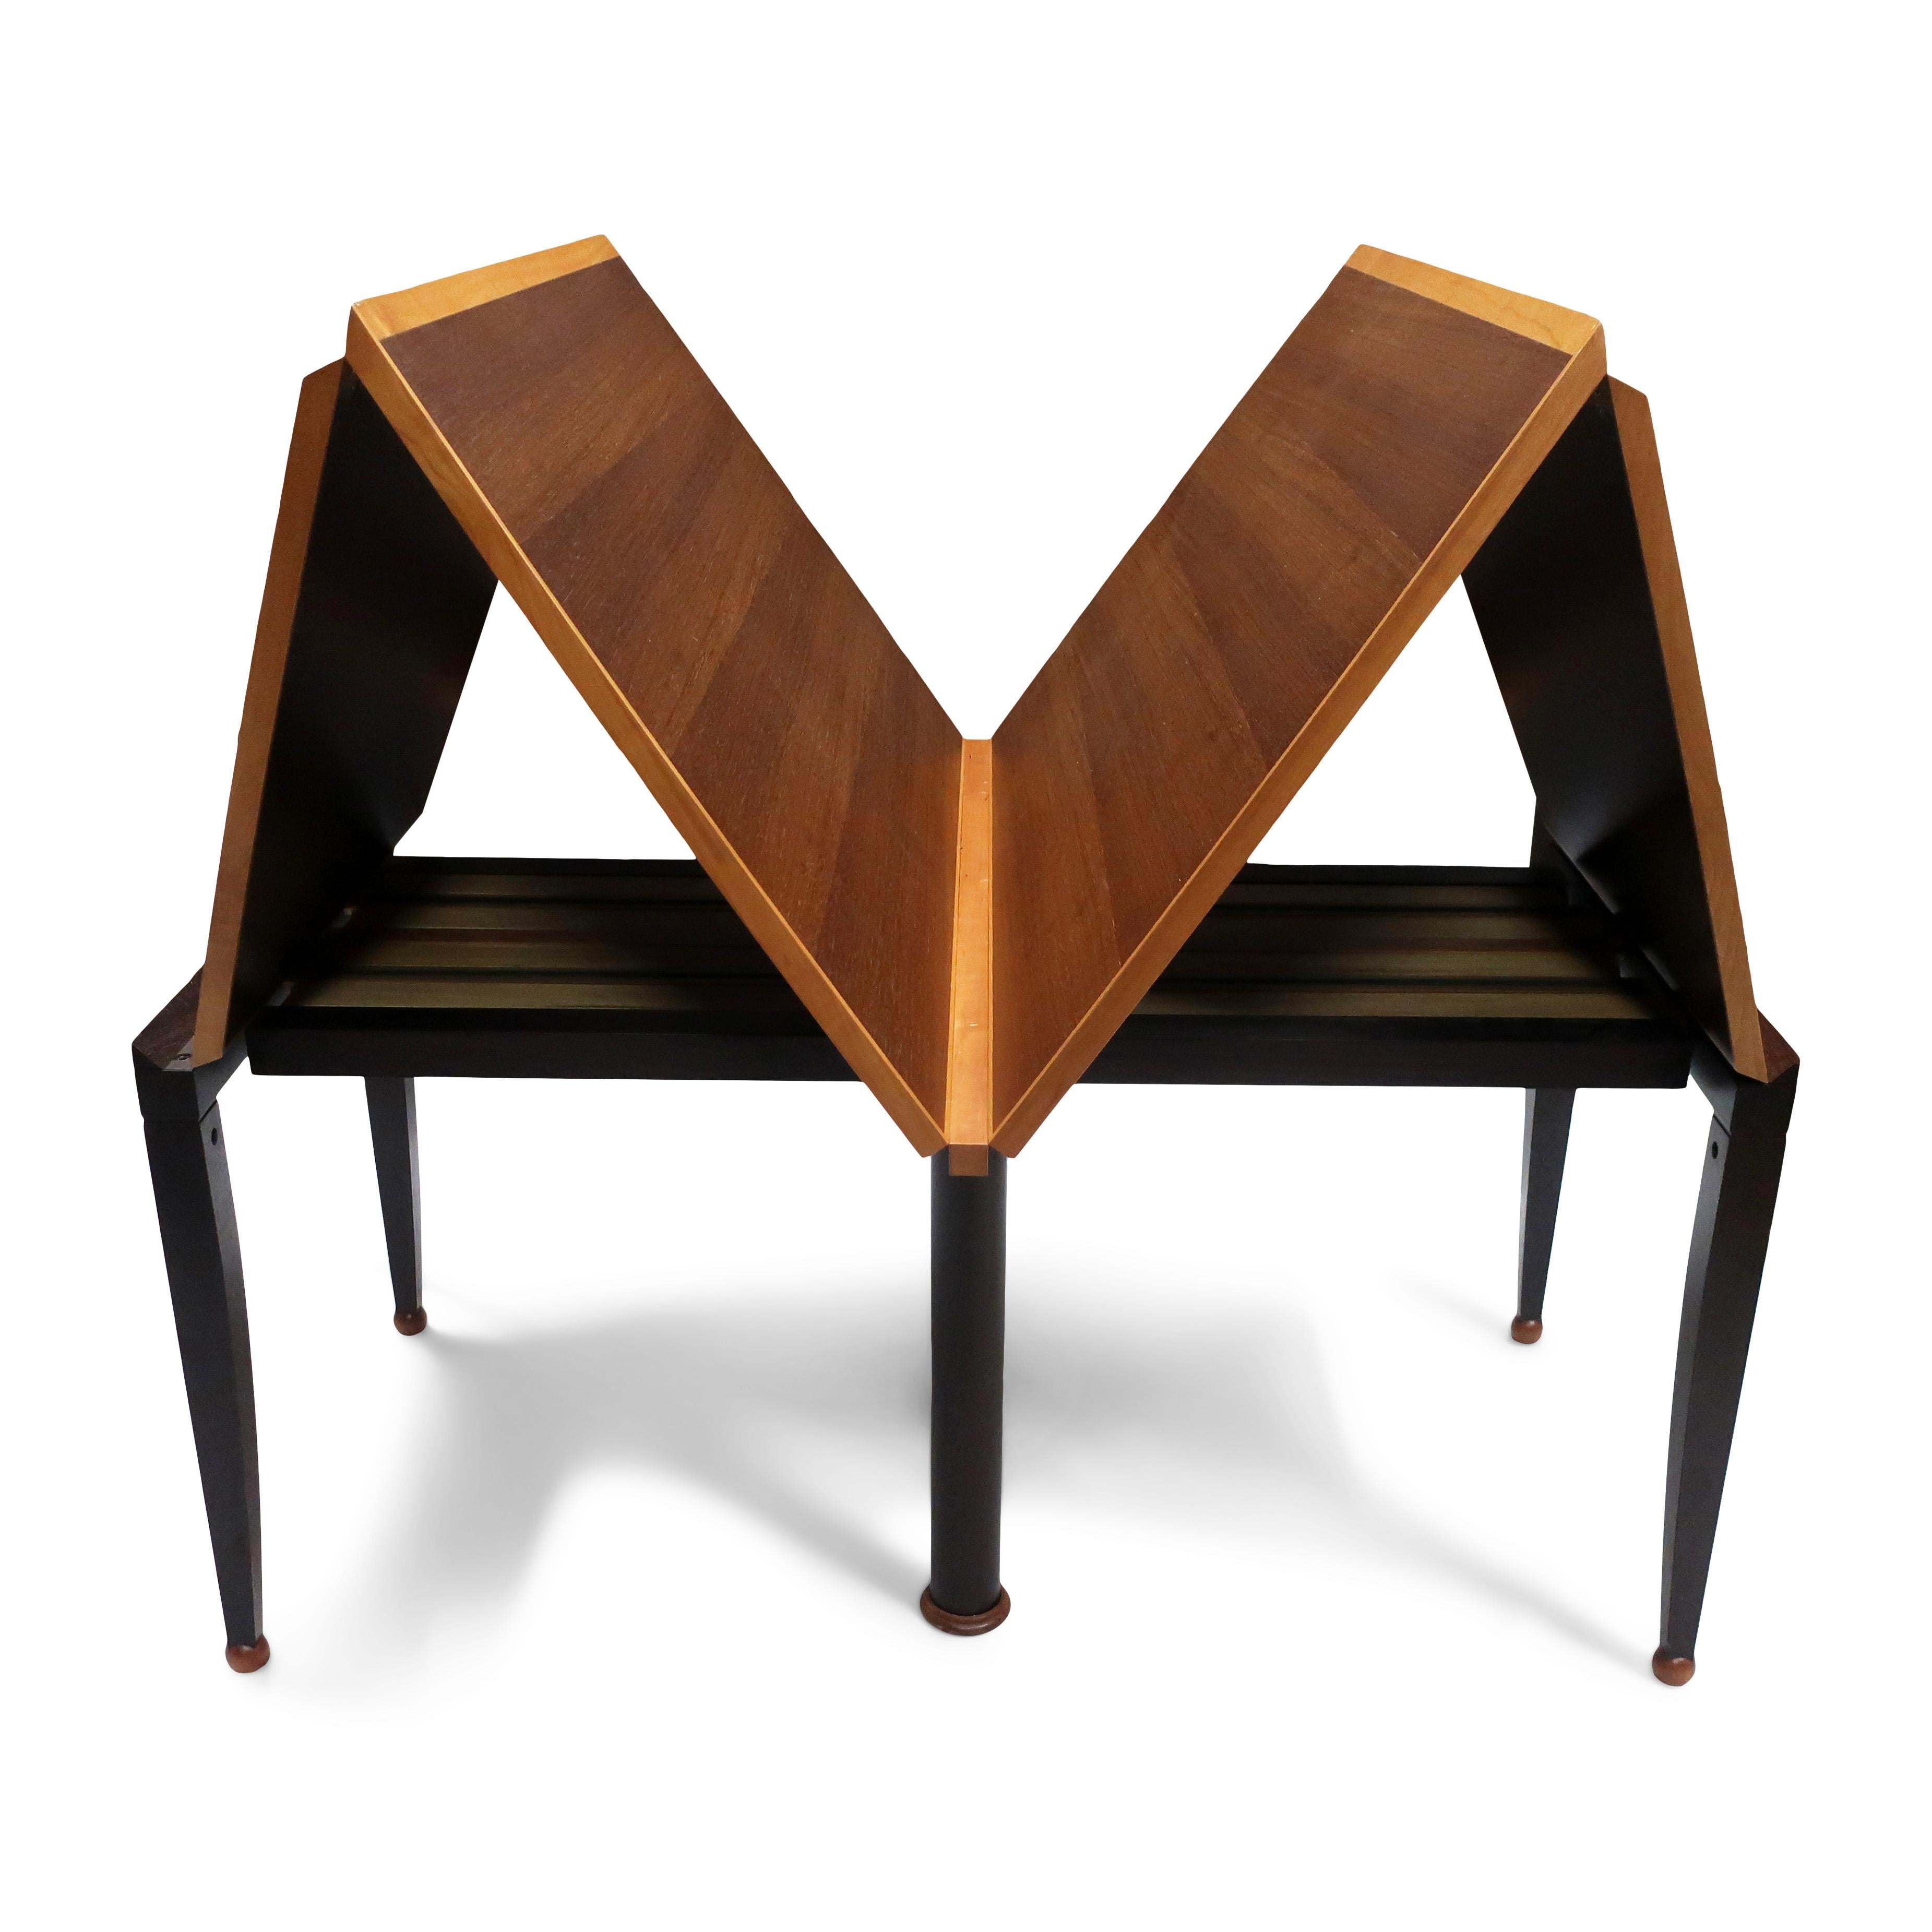 Tabula Magna Dining Table by Oscar Tosquets Blanca for Driade Aleph, '1991' For Sale 1